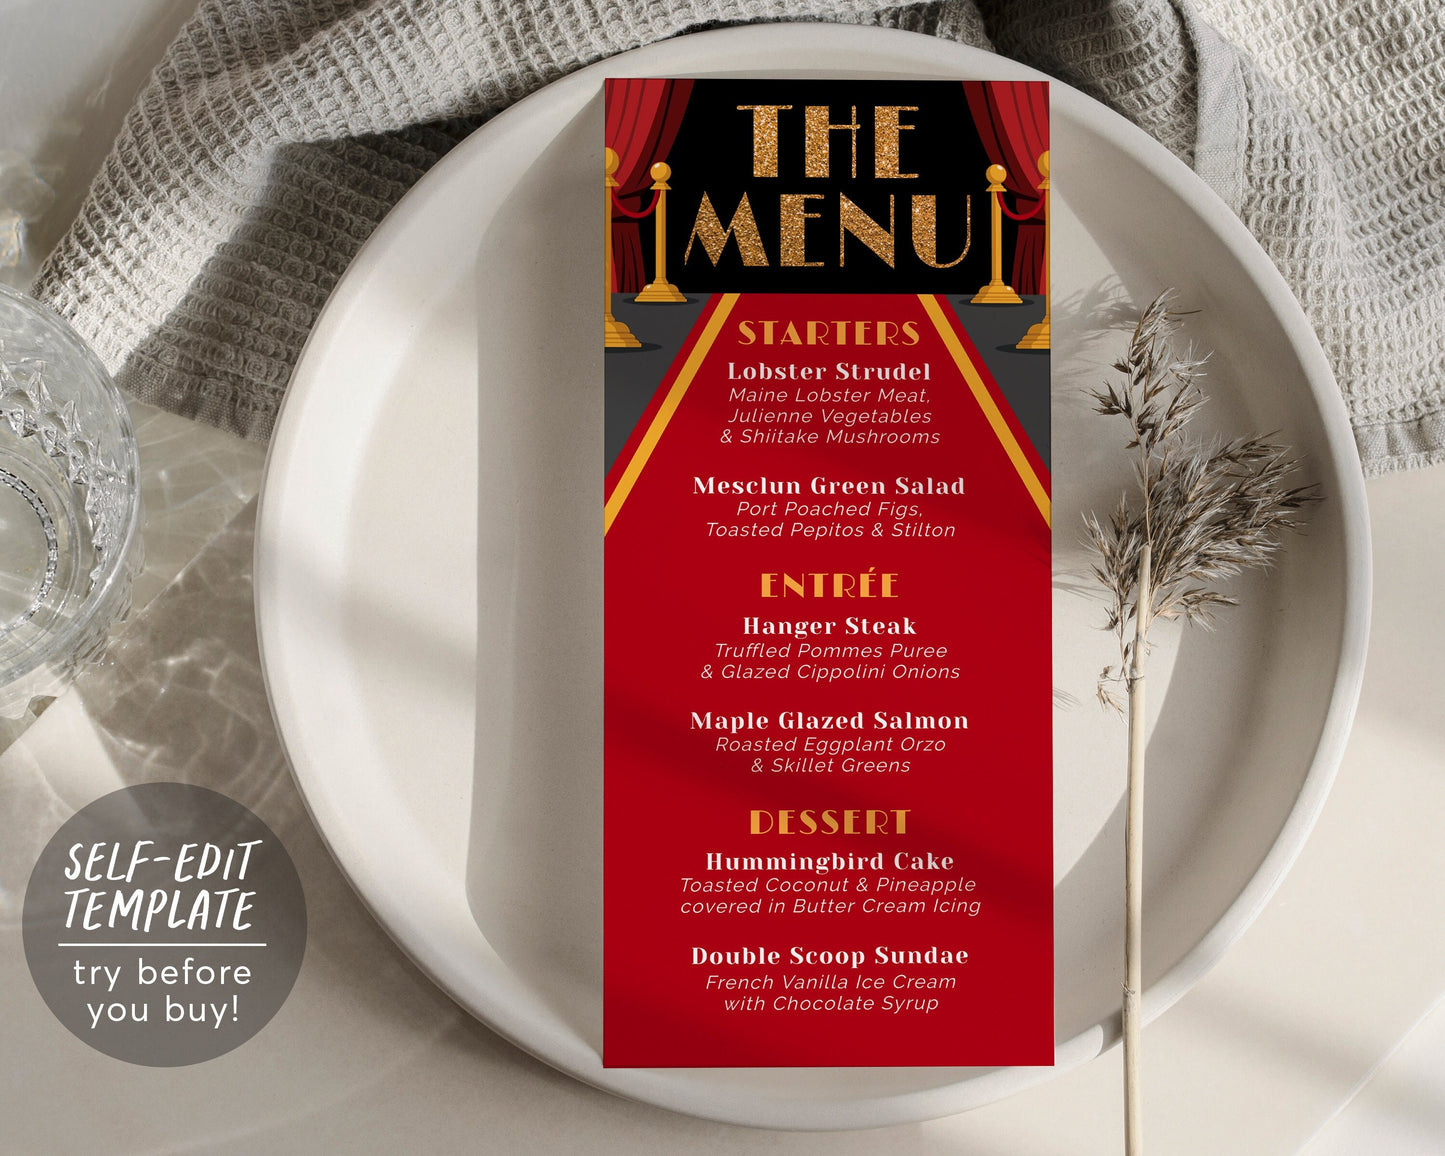 Red Carpet Dinner Menu Editable Template, Hollywood VIP Pass Sweet Sixteen Birthday Menu, Prom Wedding Movie Star Glam Party Food and Drink